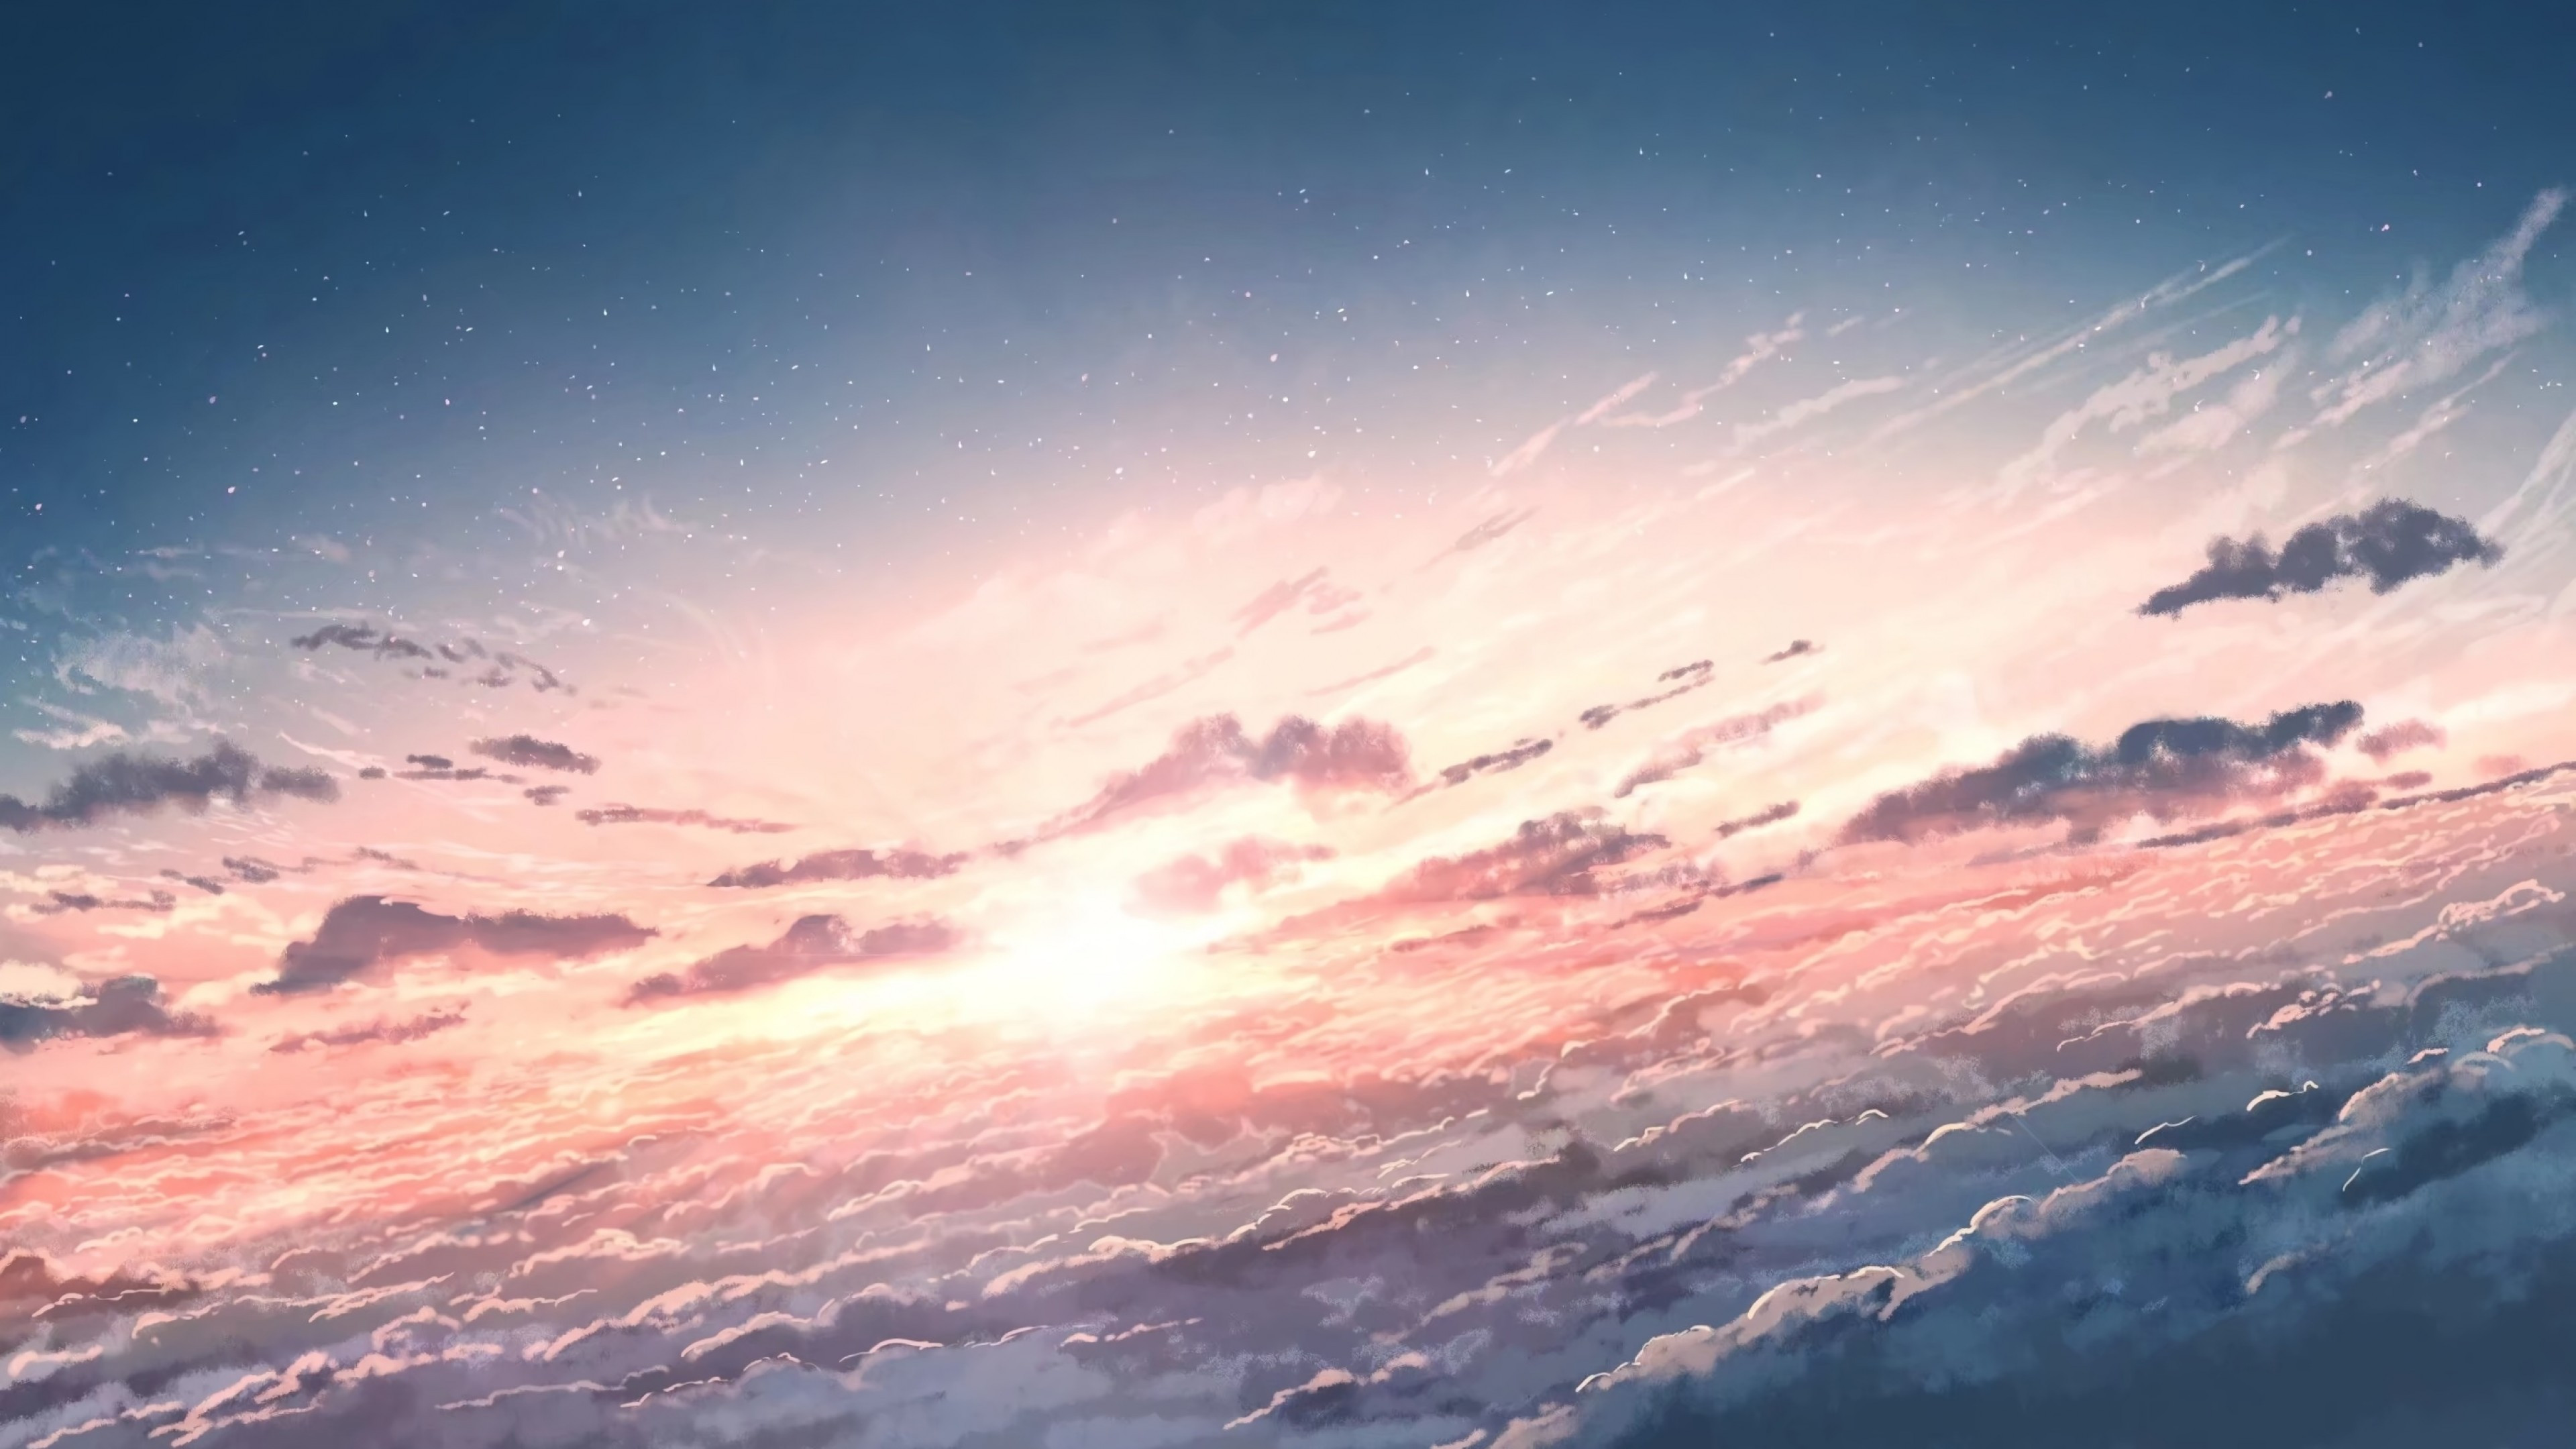 Download 3840x2160 Anime Sky, Beyond The Clouds, Sunset, Scenery Wallpaper for UHD TV